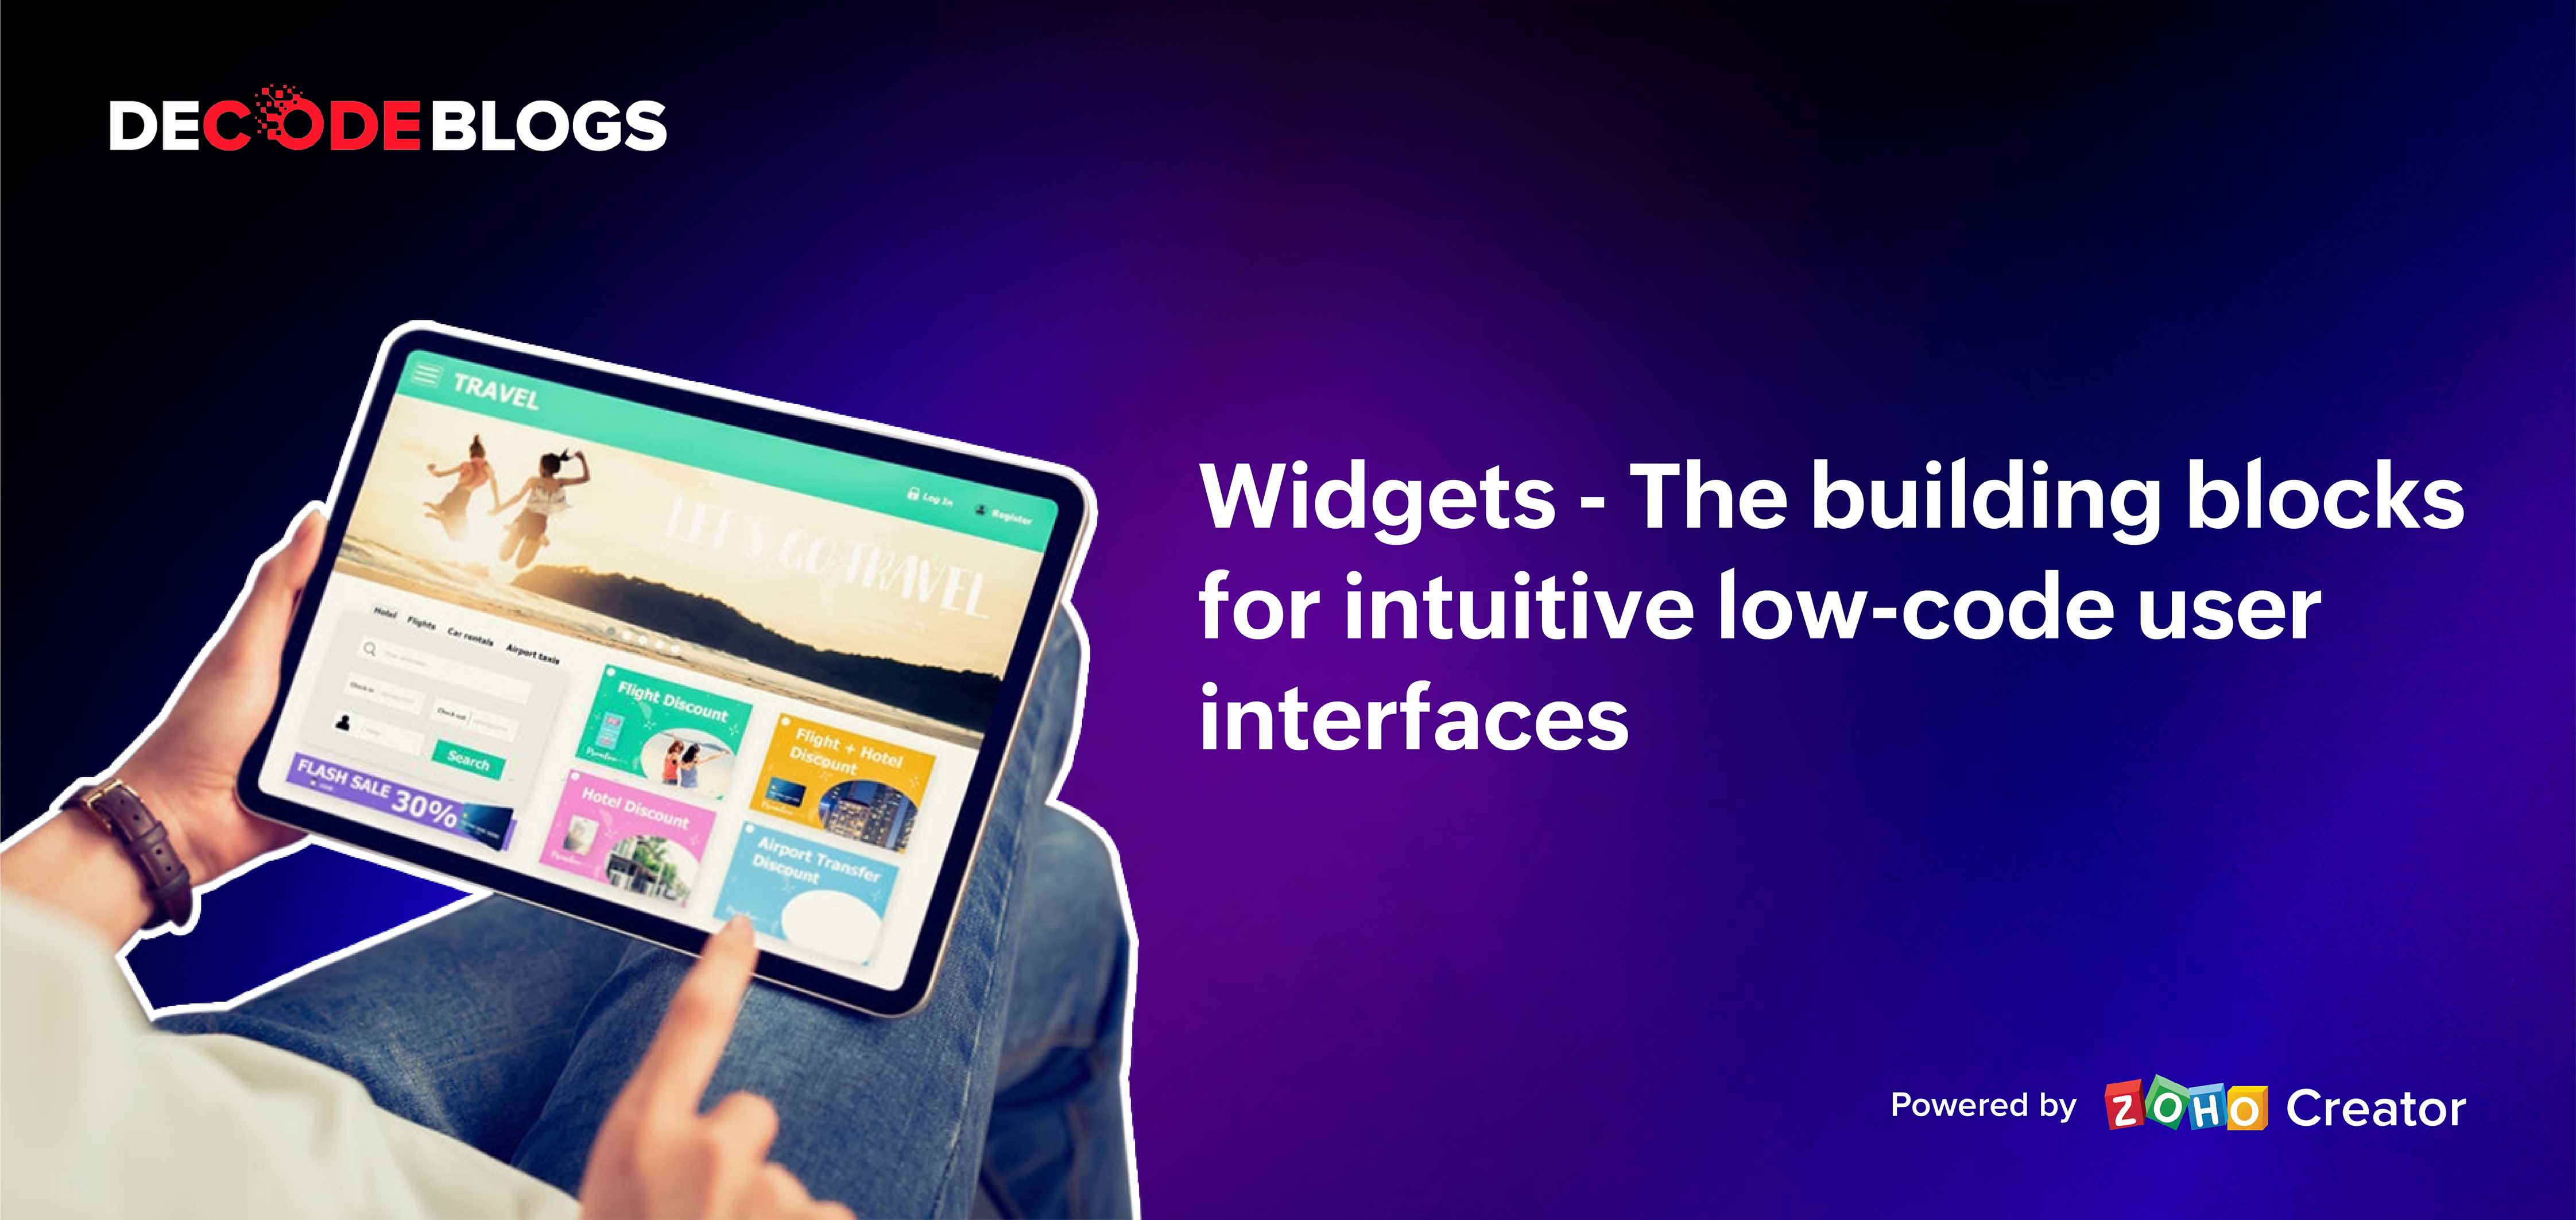 widgets the building blocks for intuitive low-code UIs